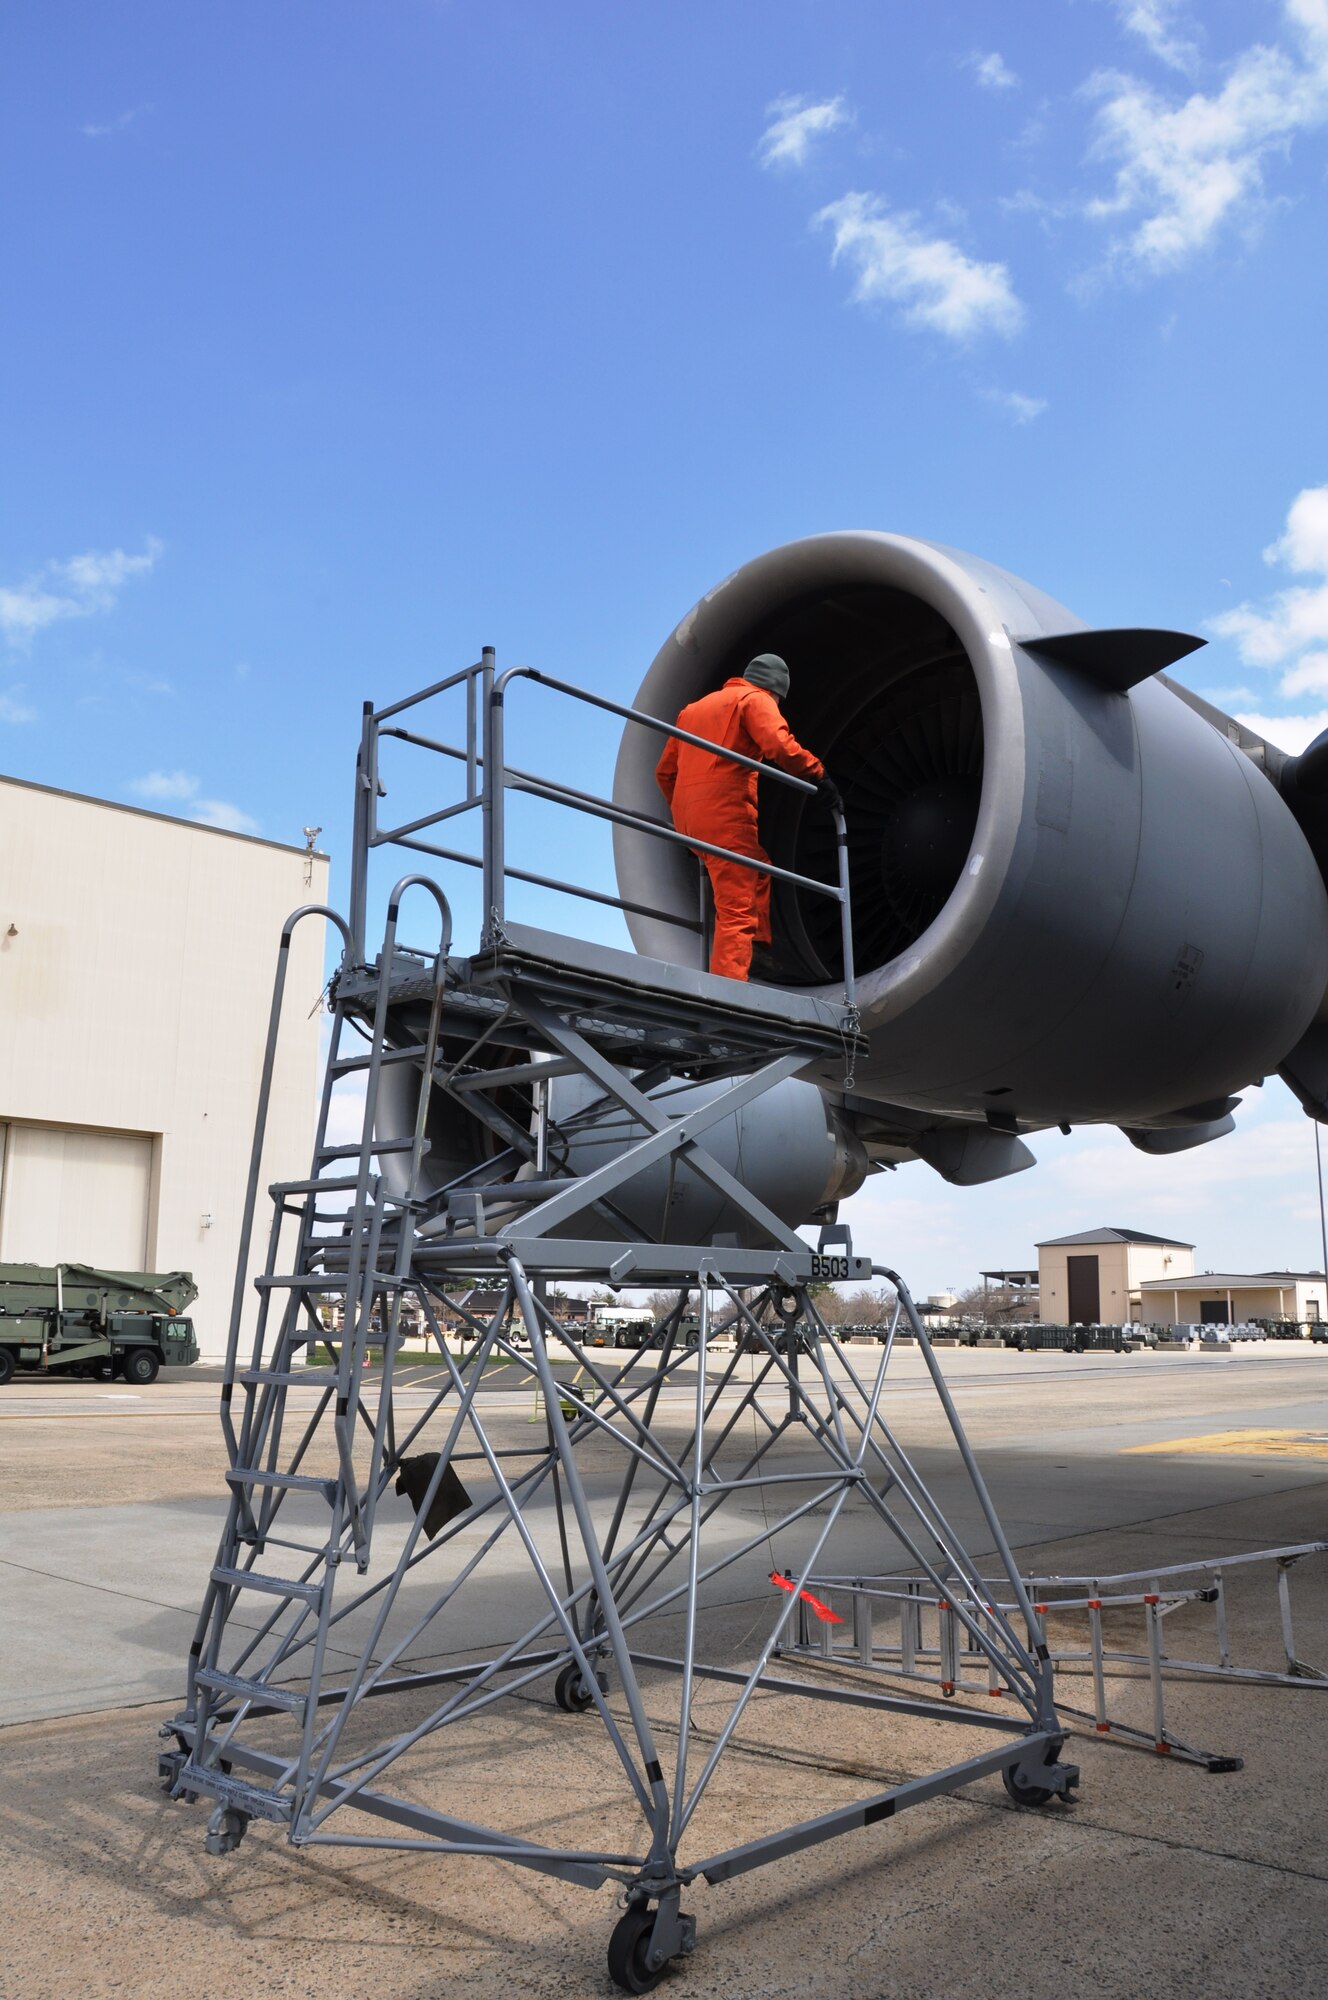 Staff Sgt. Hector Martinez, 514th Aircraft Maintenance Squadron aerospace propulsion technician, conducts a routine inspection on the engine blades of a C-17 Globemaster III aircraft here April 5 (U.S. Air Force photo/Senior Airman Chelsea Smith).